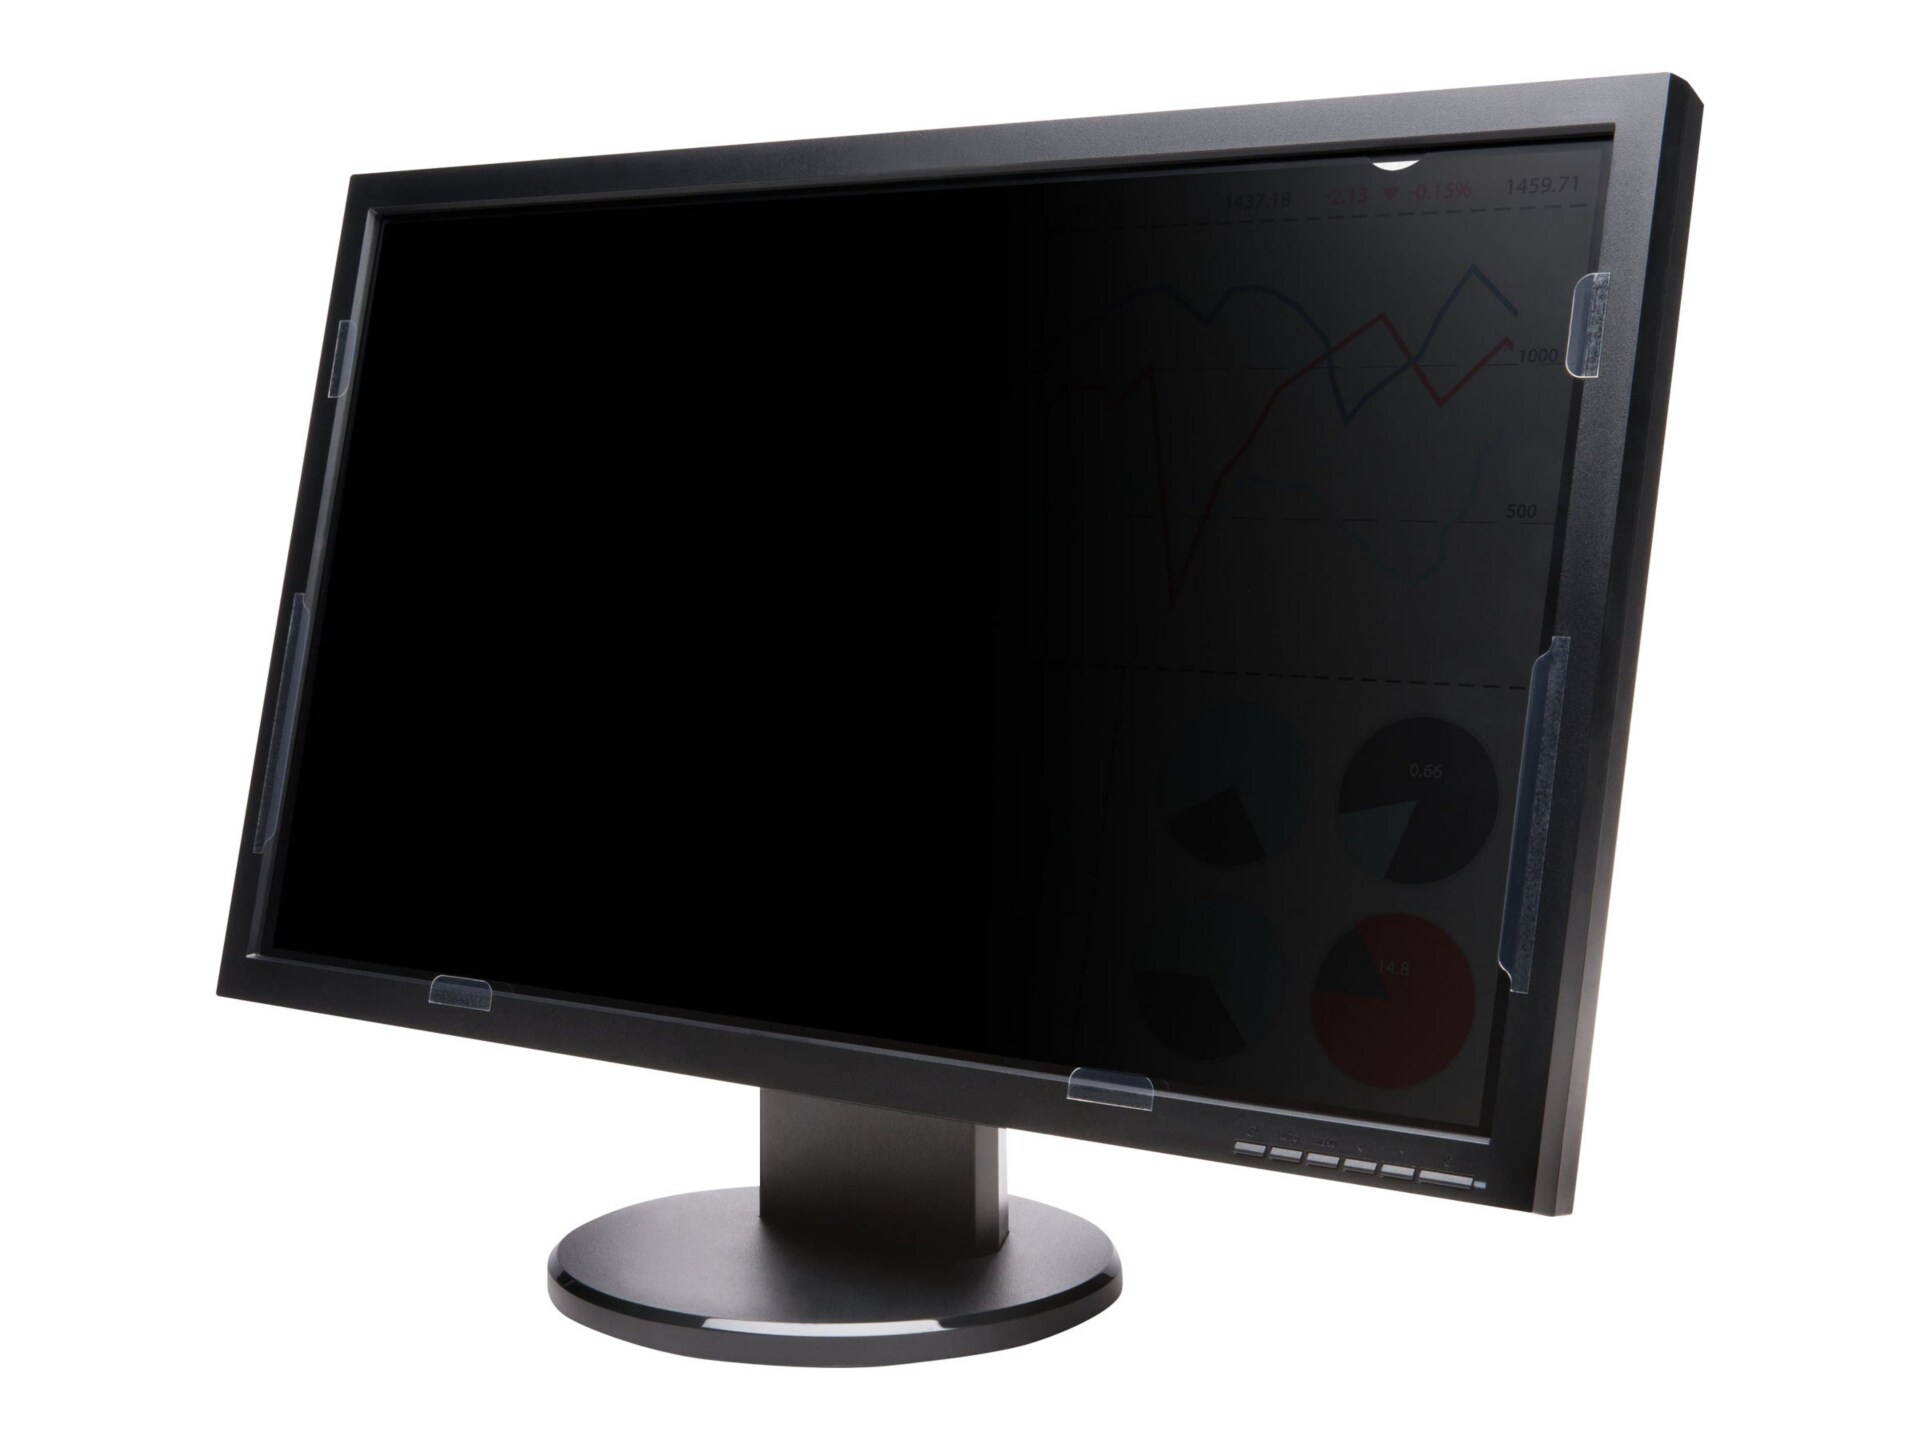 Kensington FP215W9 Privacy Screen for 21,5" Widescreen Monitors - 16:9 - display screen protector - 21,5" wide